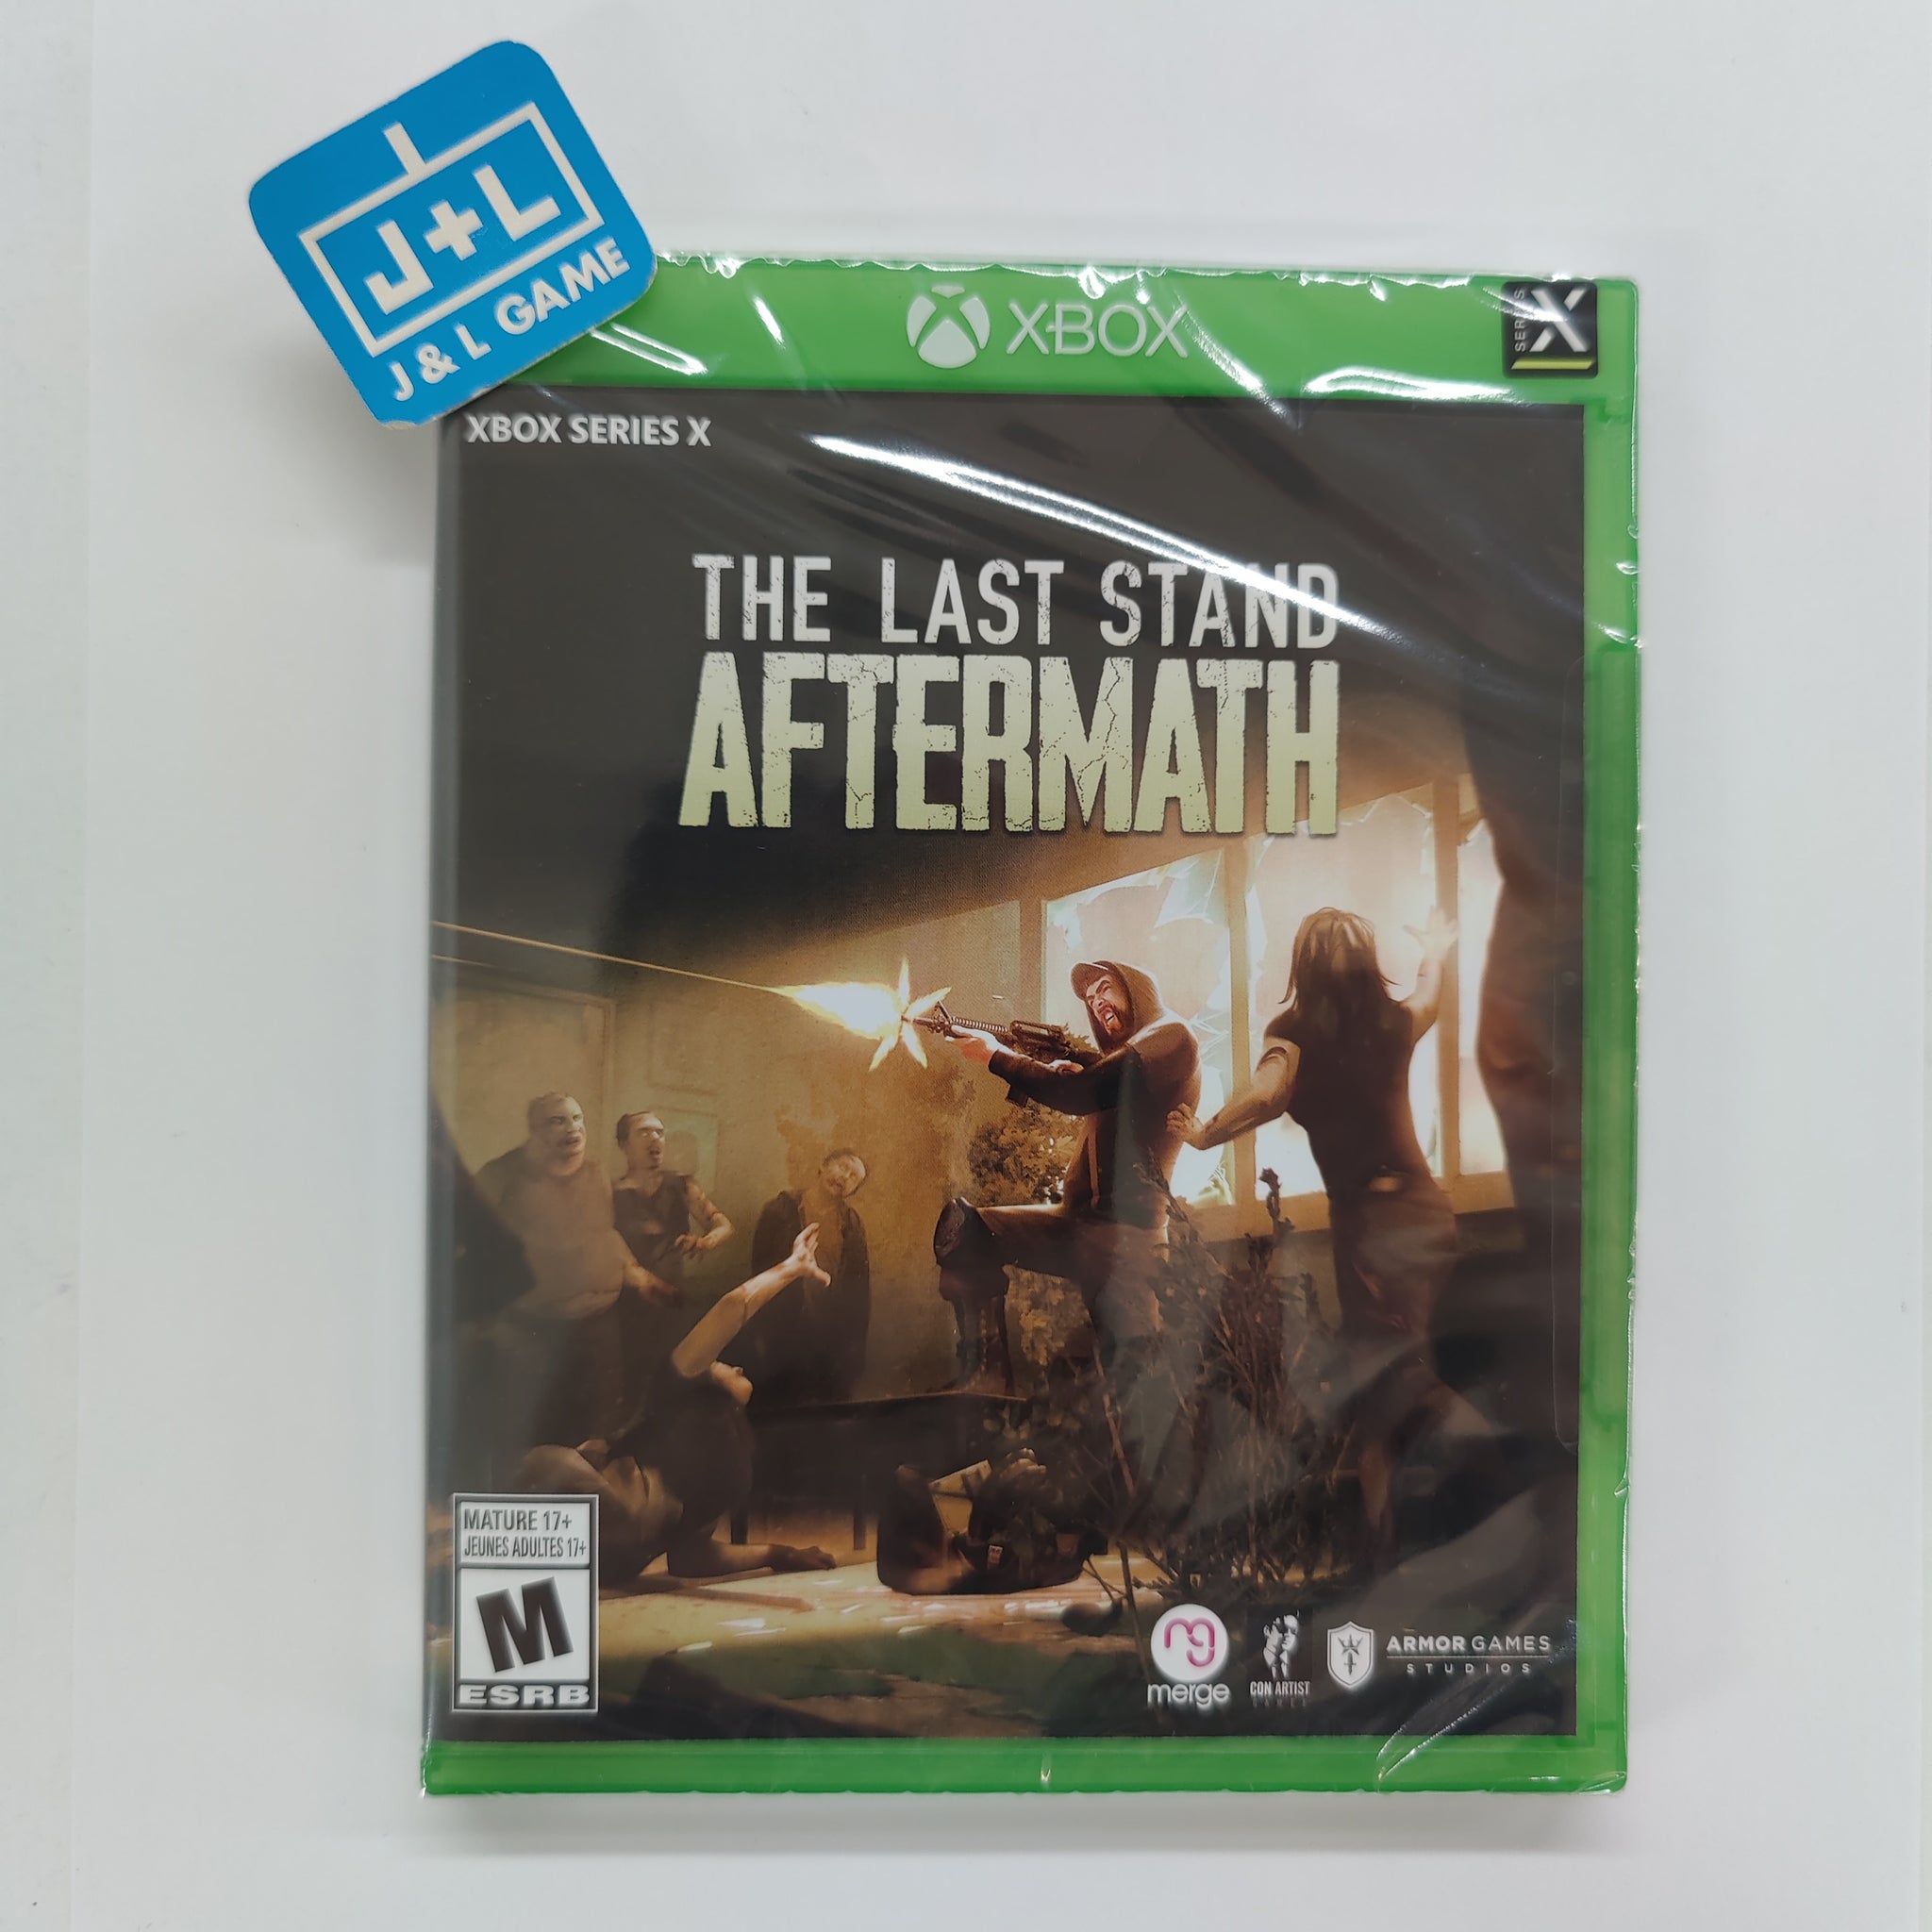 The Last Stand - Aftermath - (XSX) Xbox Series X Video Games Merge Games   